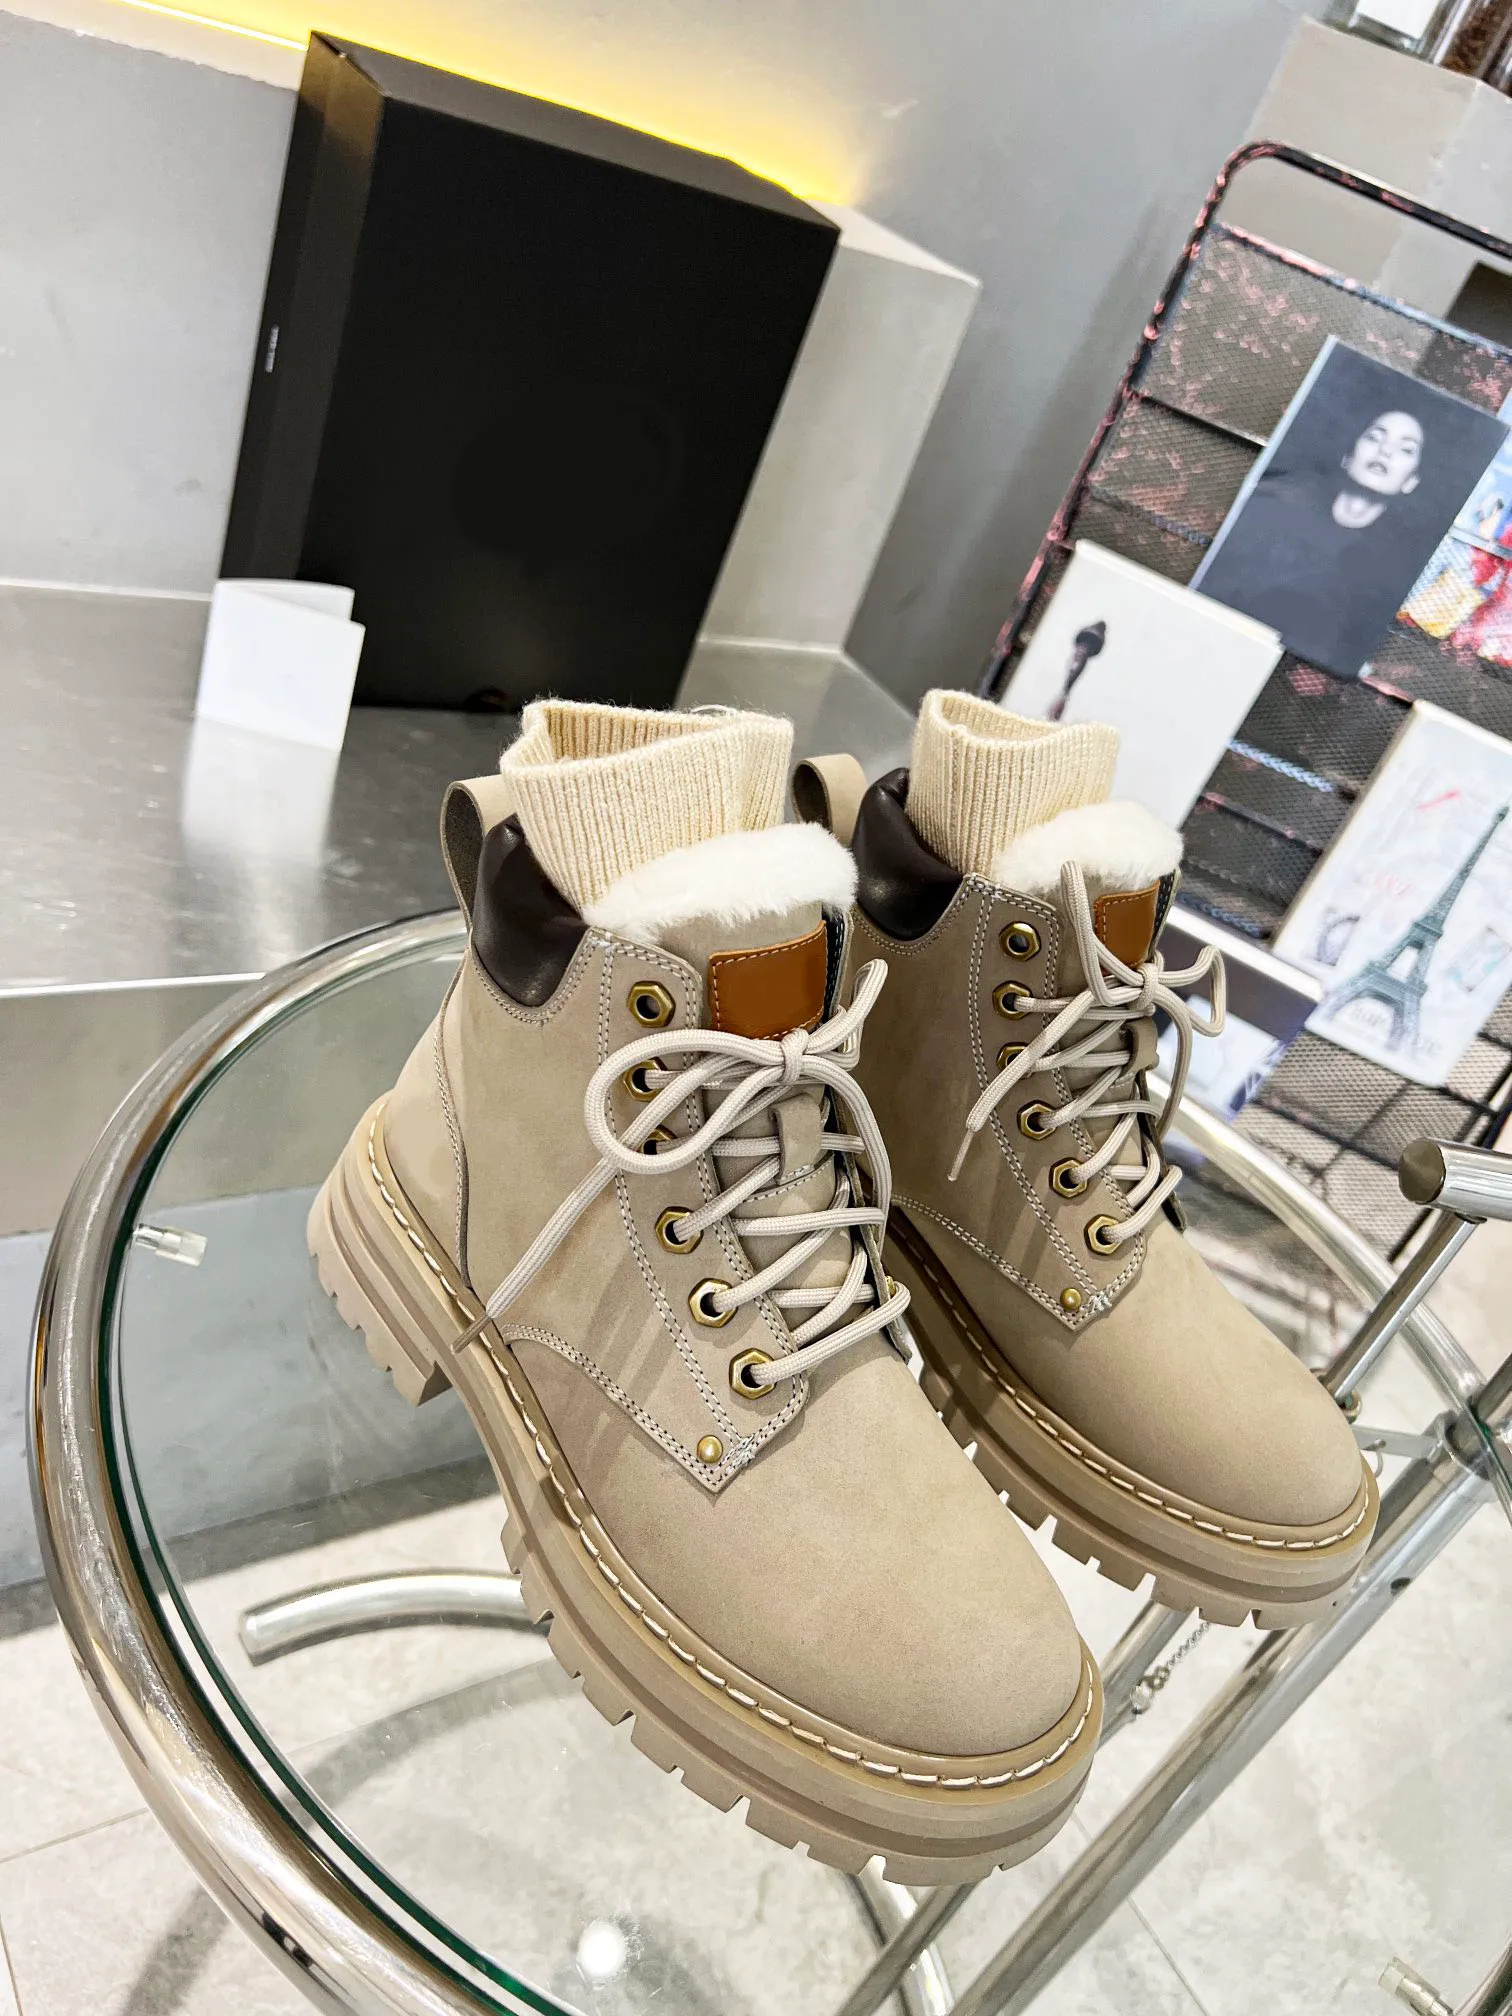 Designer Brand Martin Boots Winter Brown New Black Women Ankle Bootss Plus Cotton Socks Women`s Shoes Non-Slip Beige Flat Boots with Box 35-40